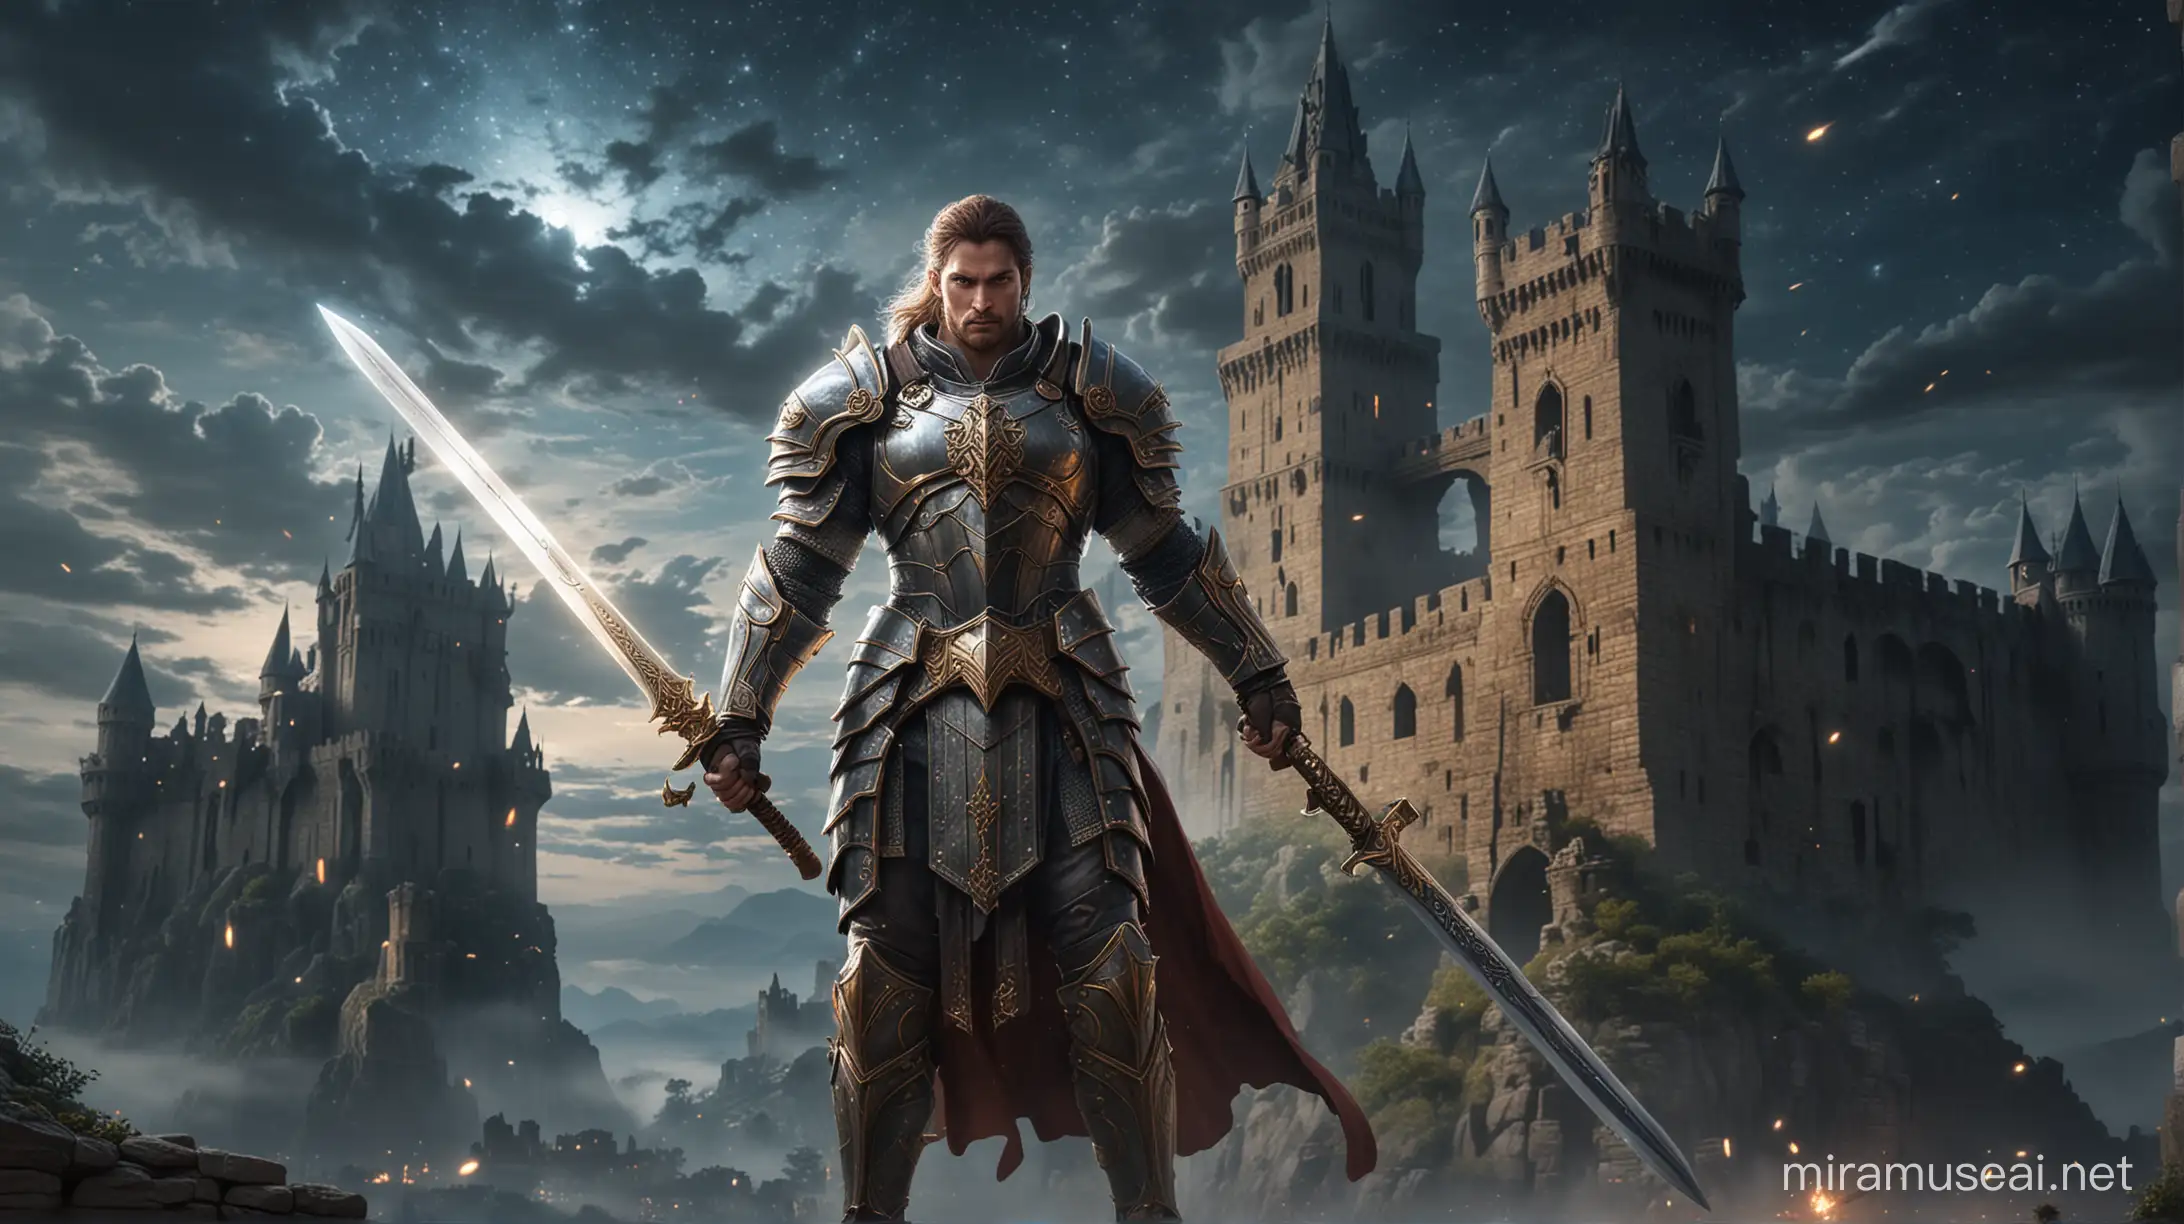 Heroic paladin in armor, wielding a sword, standing before a mystical, ancient castle under a starlit sky.